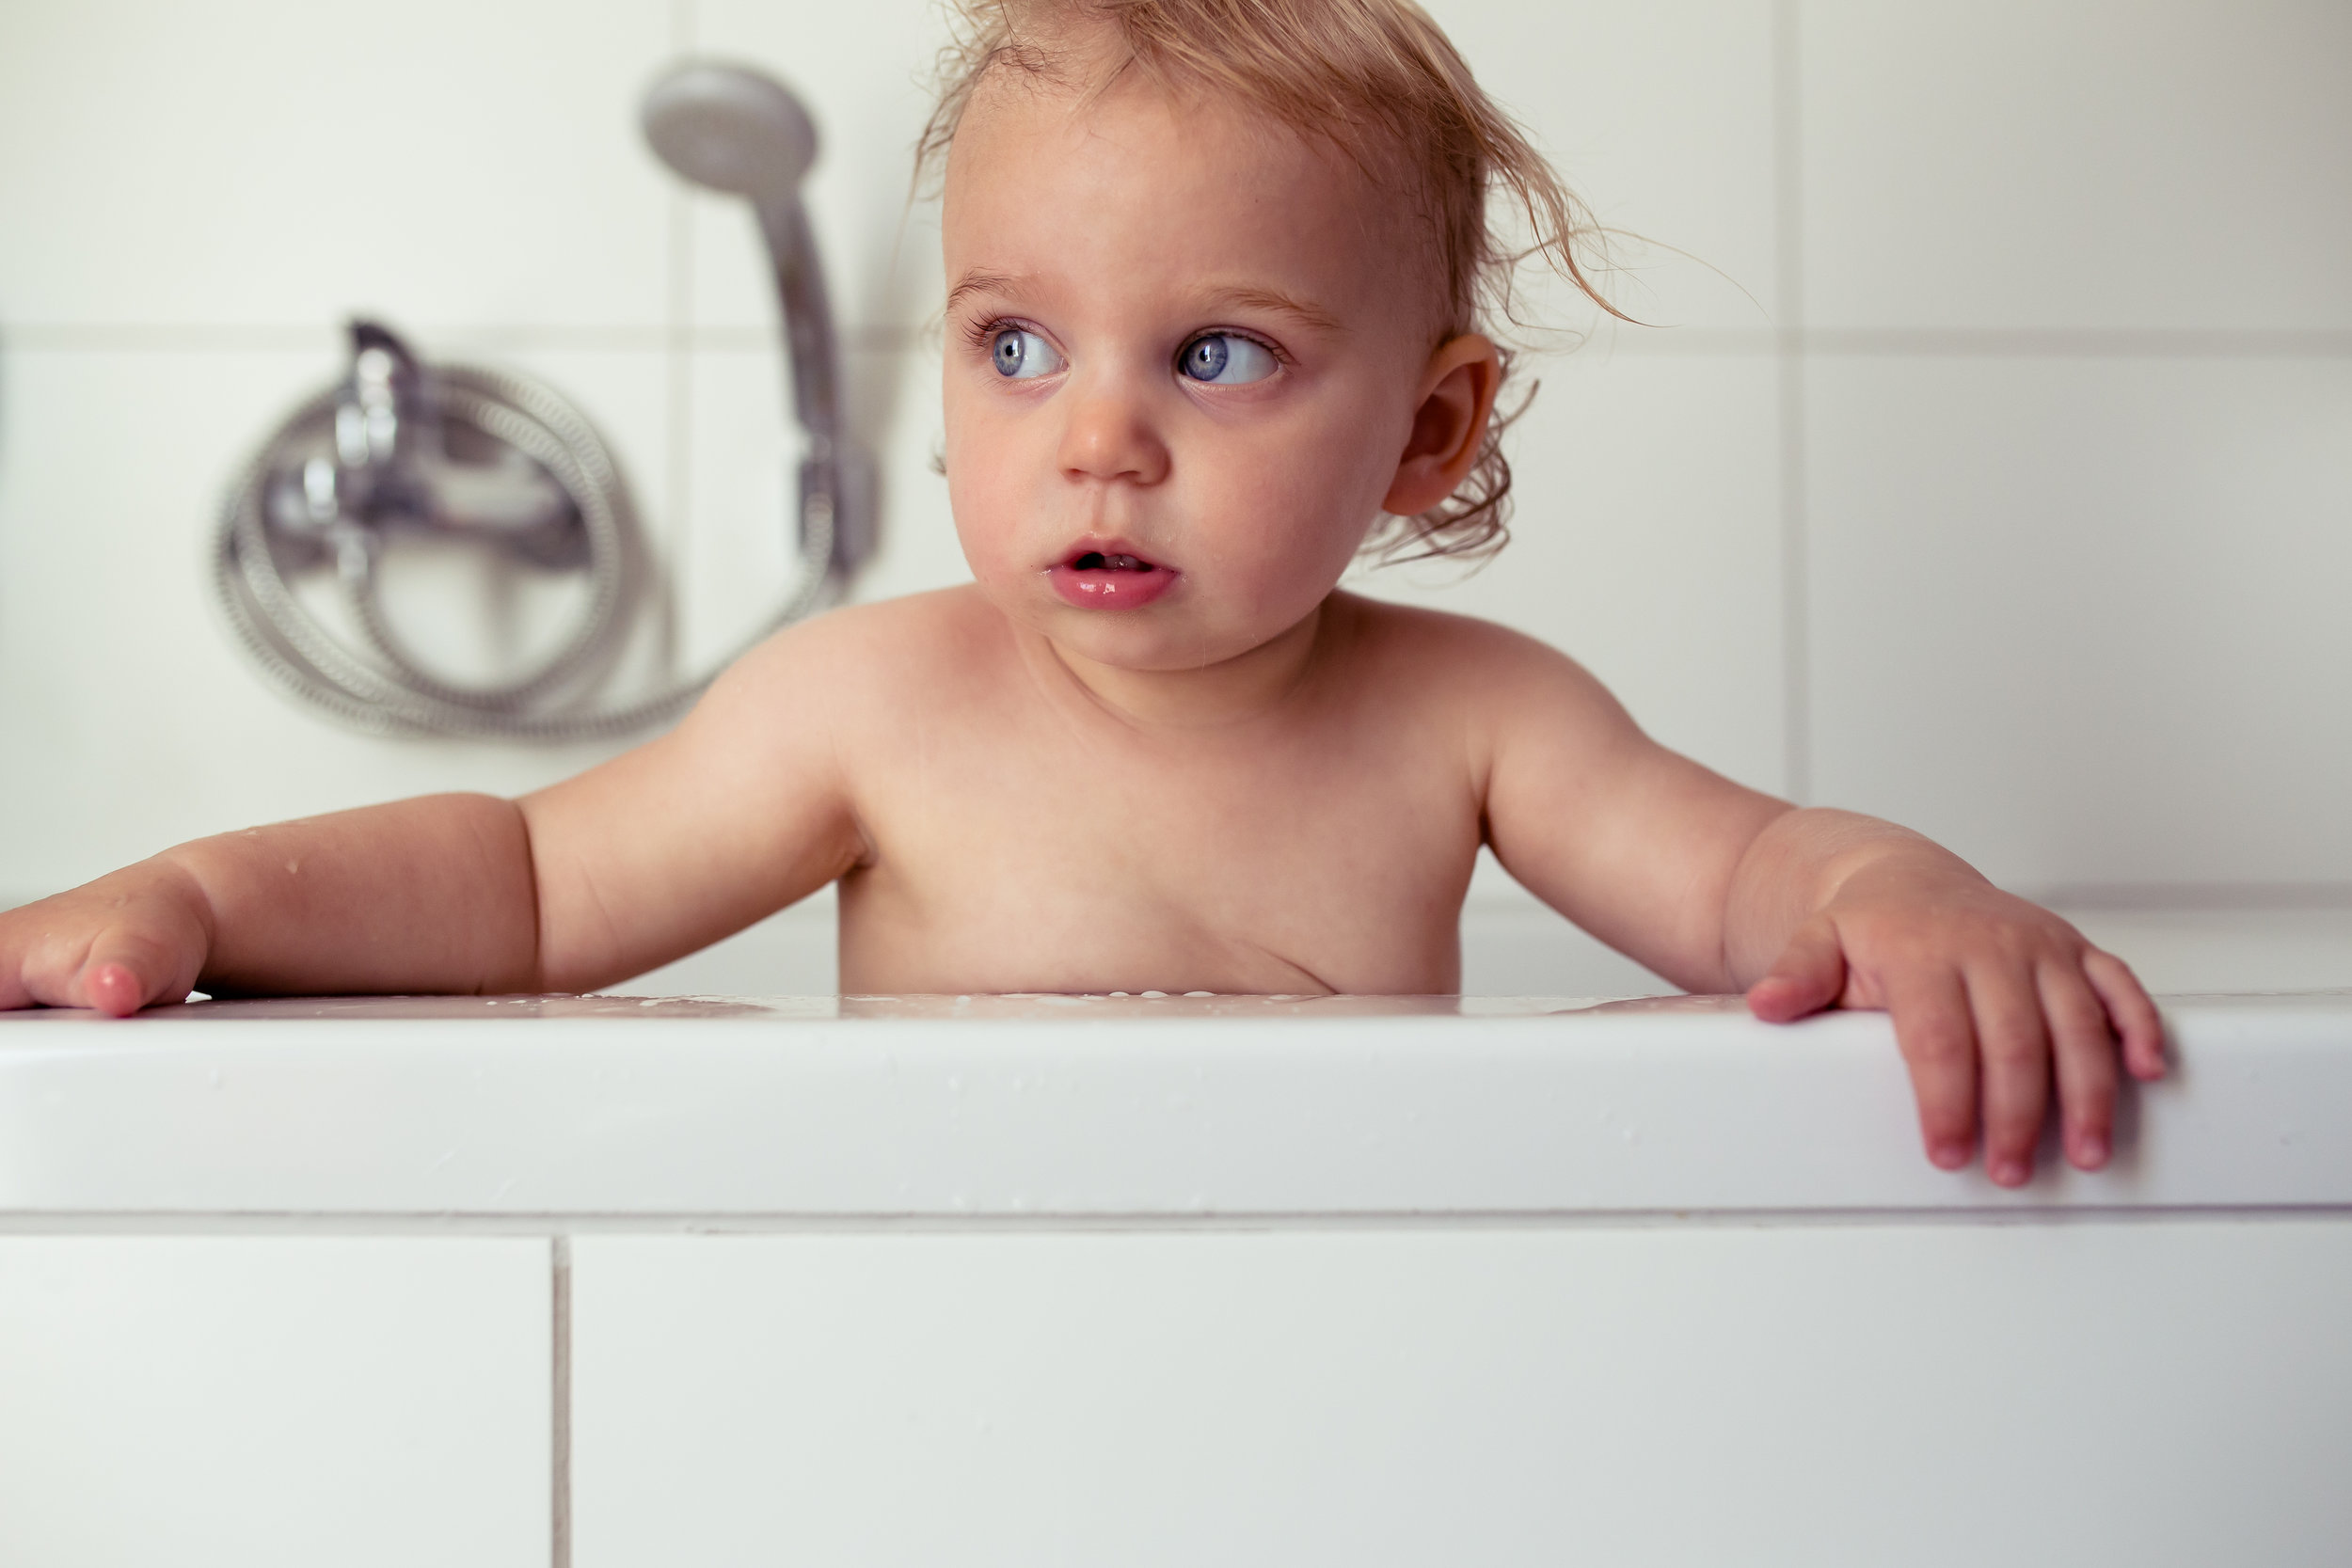 Baby looks intently to the distance while in bath tub